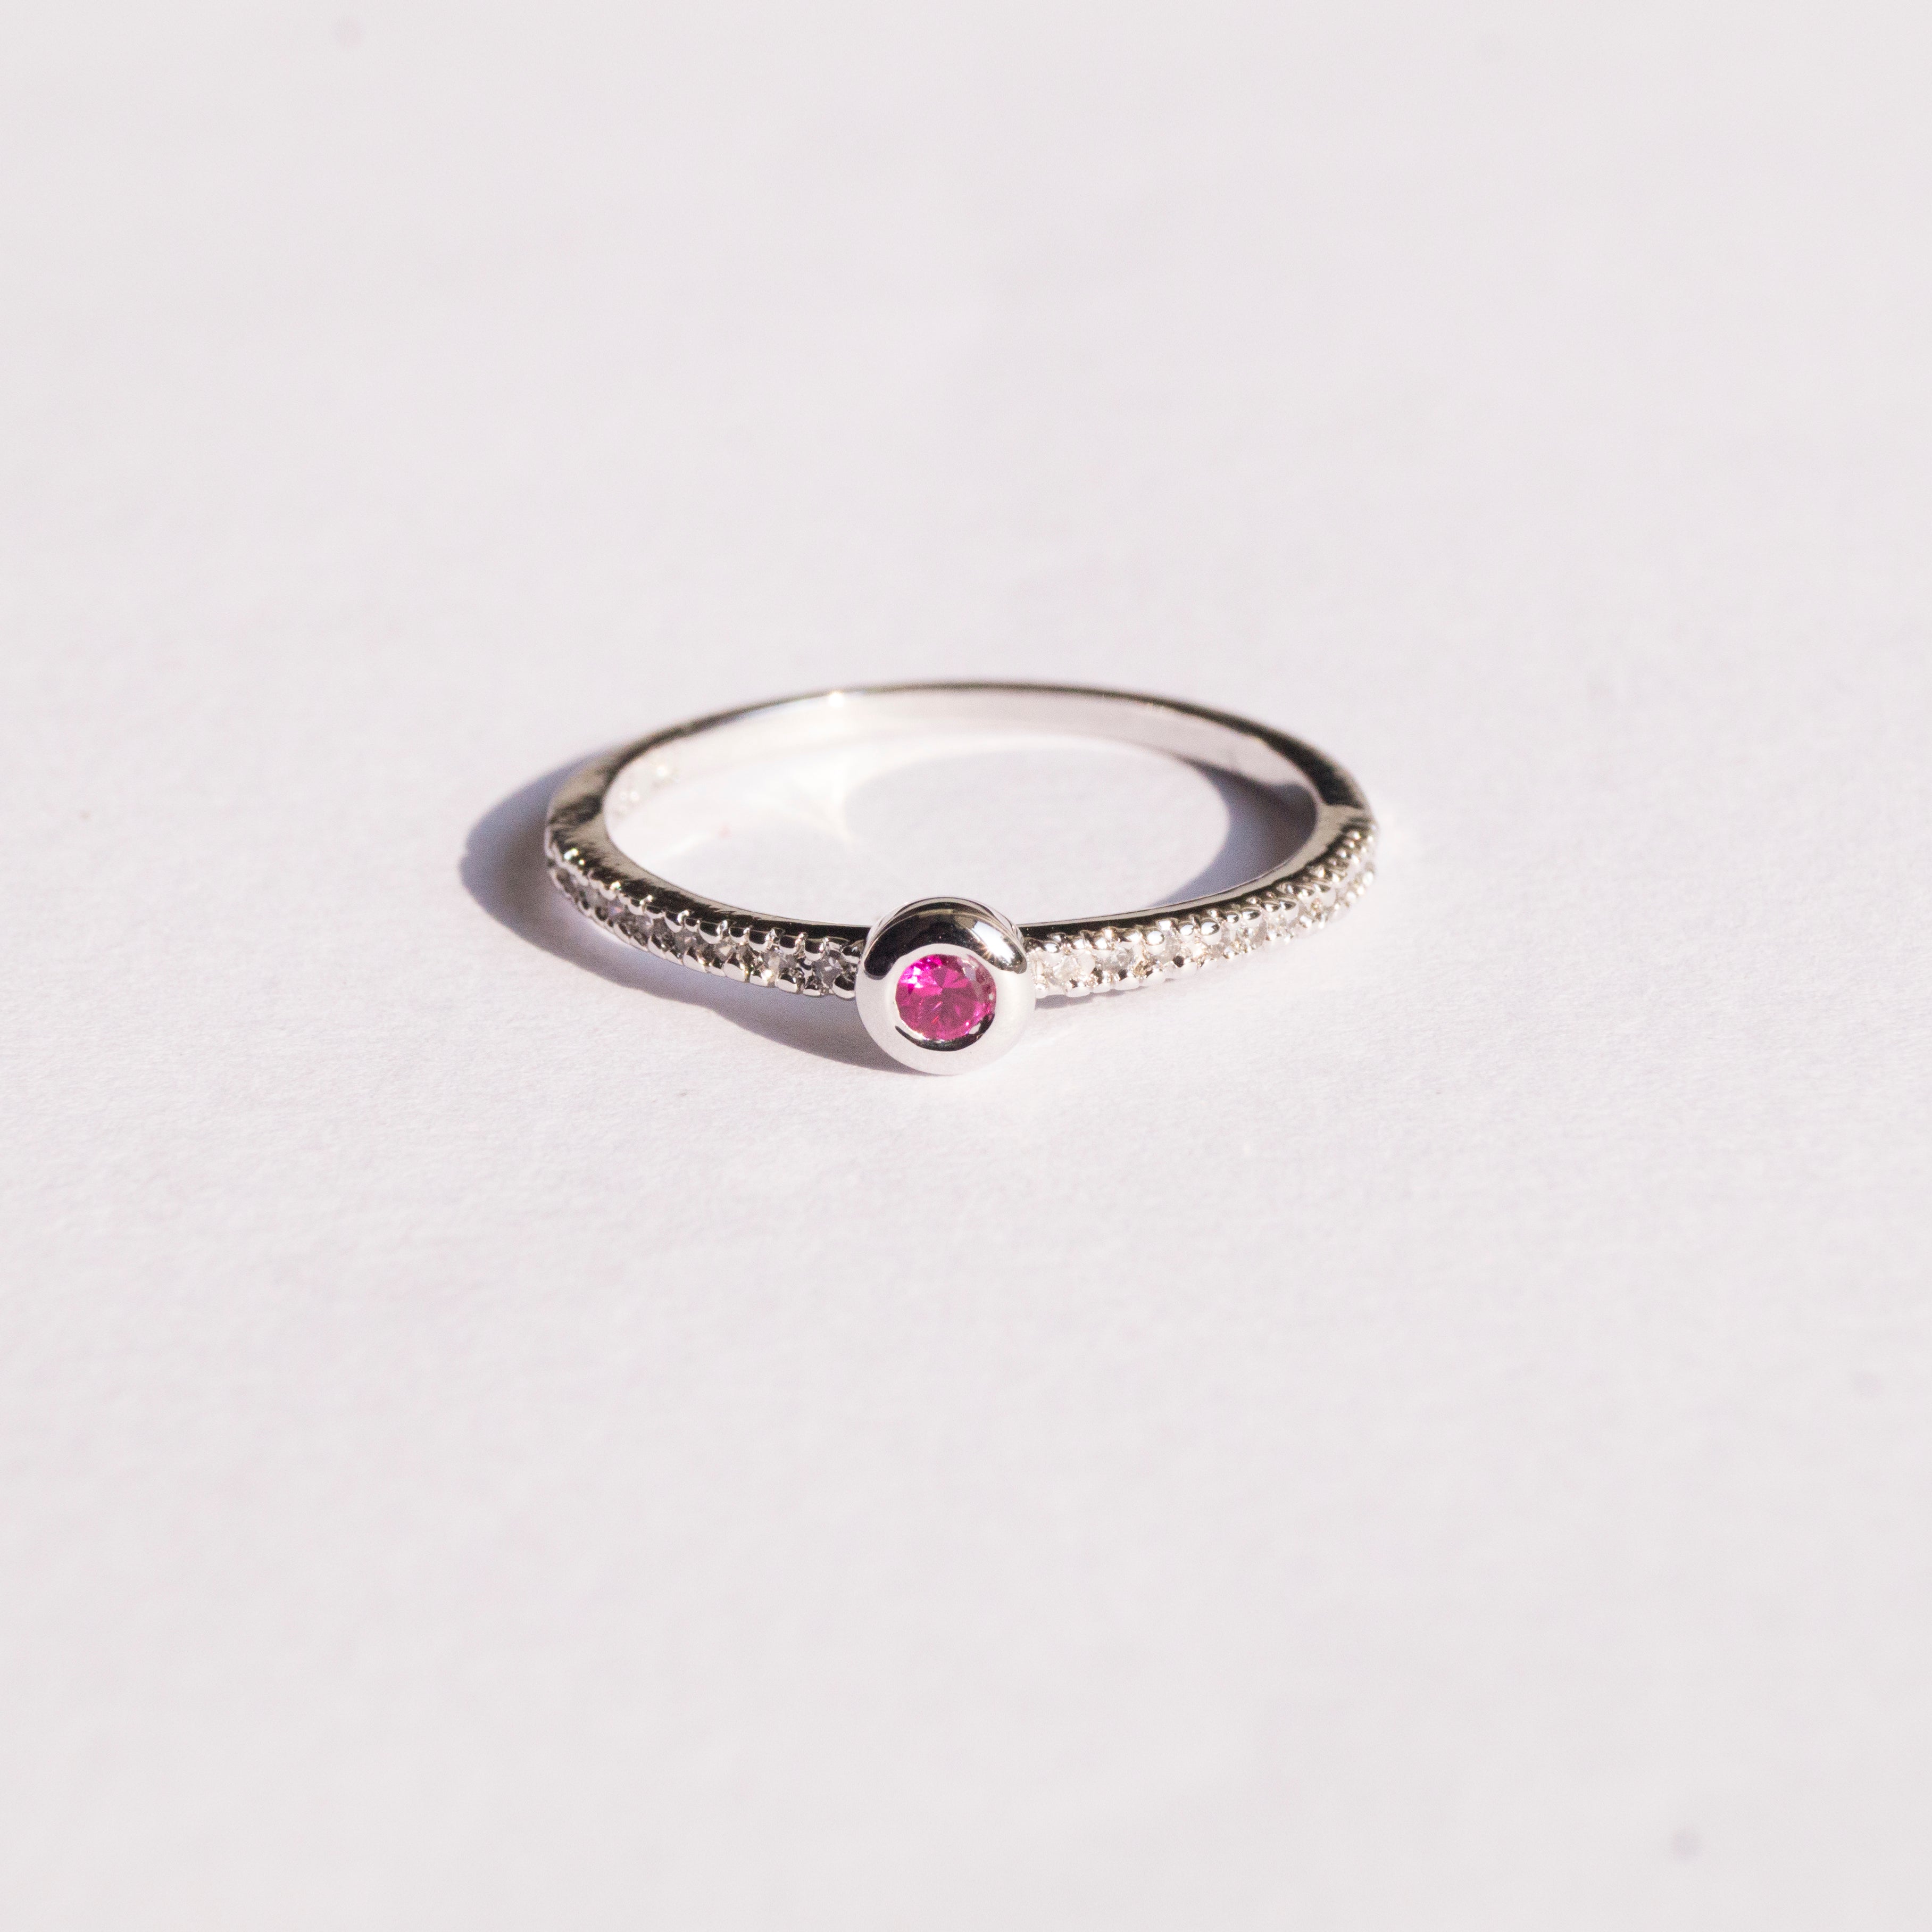 The Classic CZ Ring